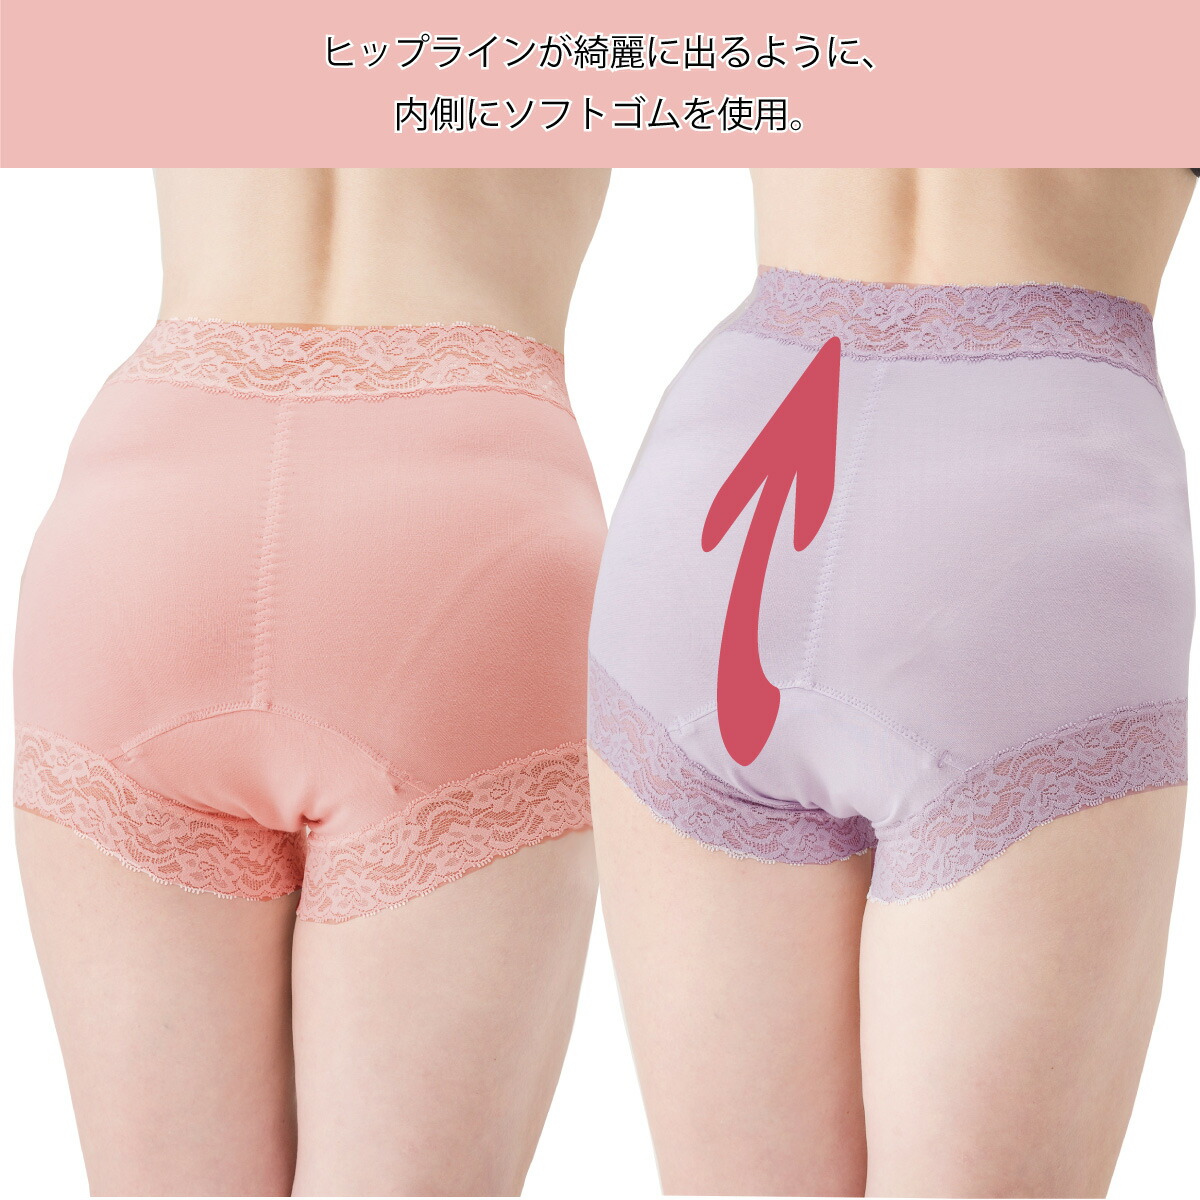  incontinence pants for women approximately 45cc 3 sheets set S M L LL 1 minute height light incontinence . prohibitation shorts deep put on footwear pad pad pregnancy after postpartum incontinence prevention pants cat pohs 